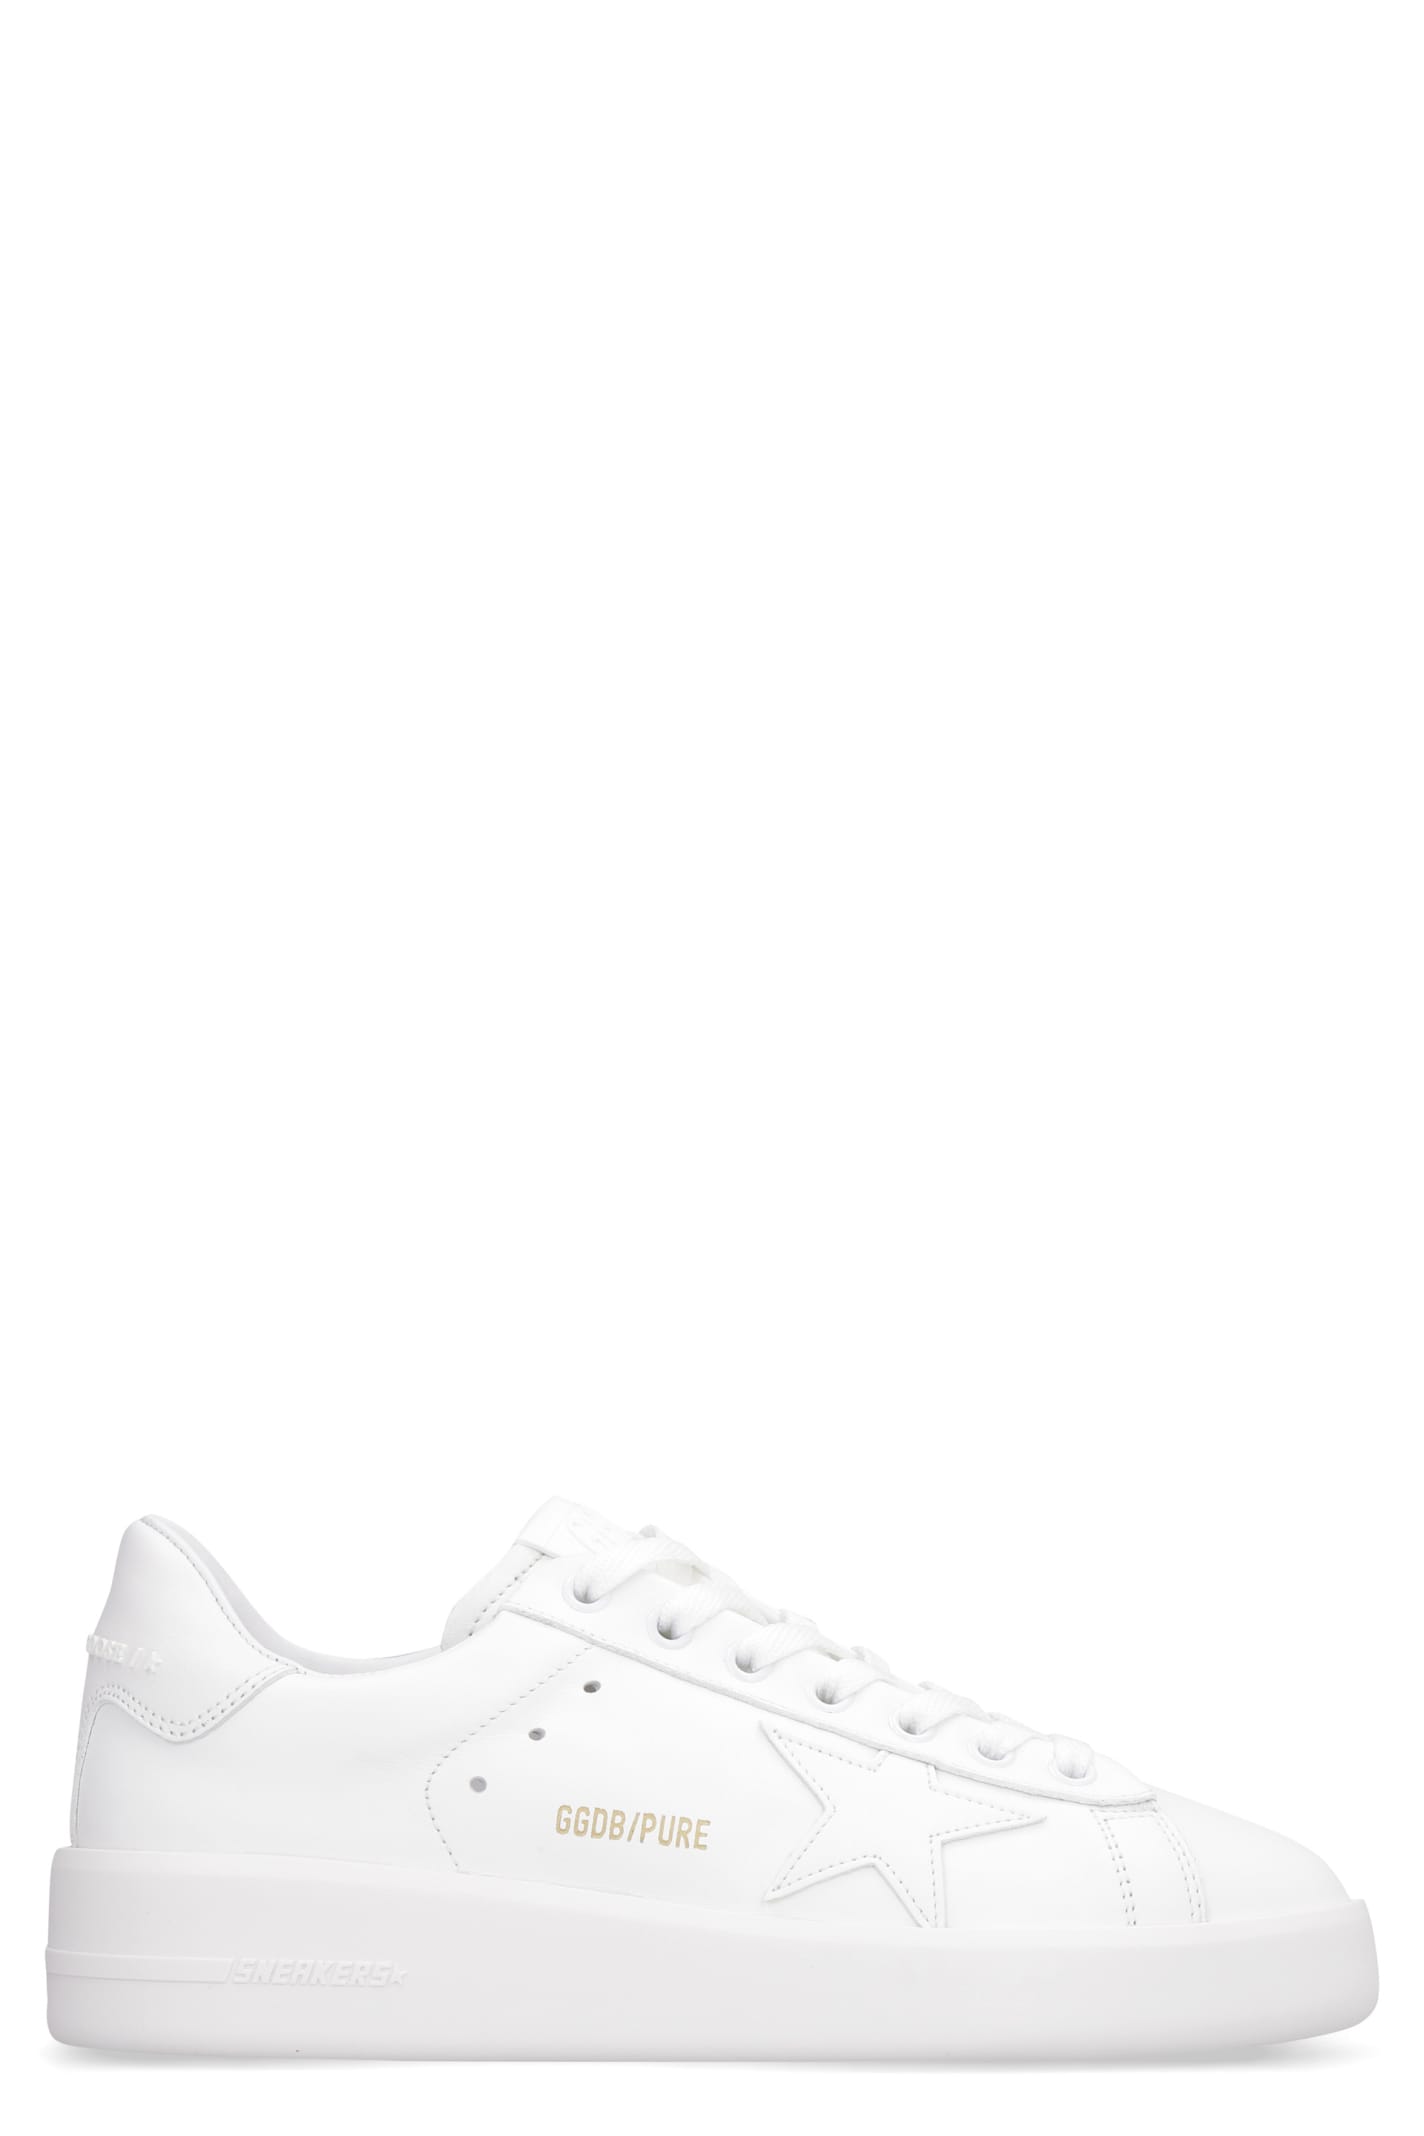 Golden Goose Pure Star Leather Low-top Sneakers